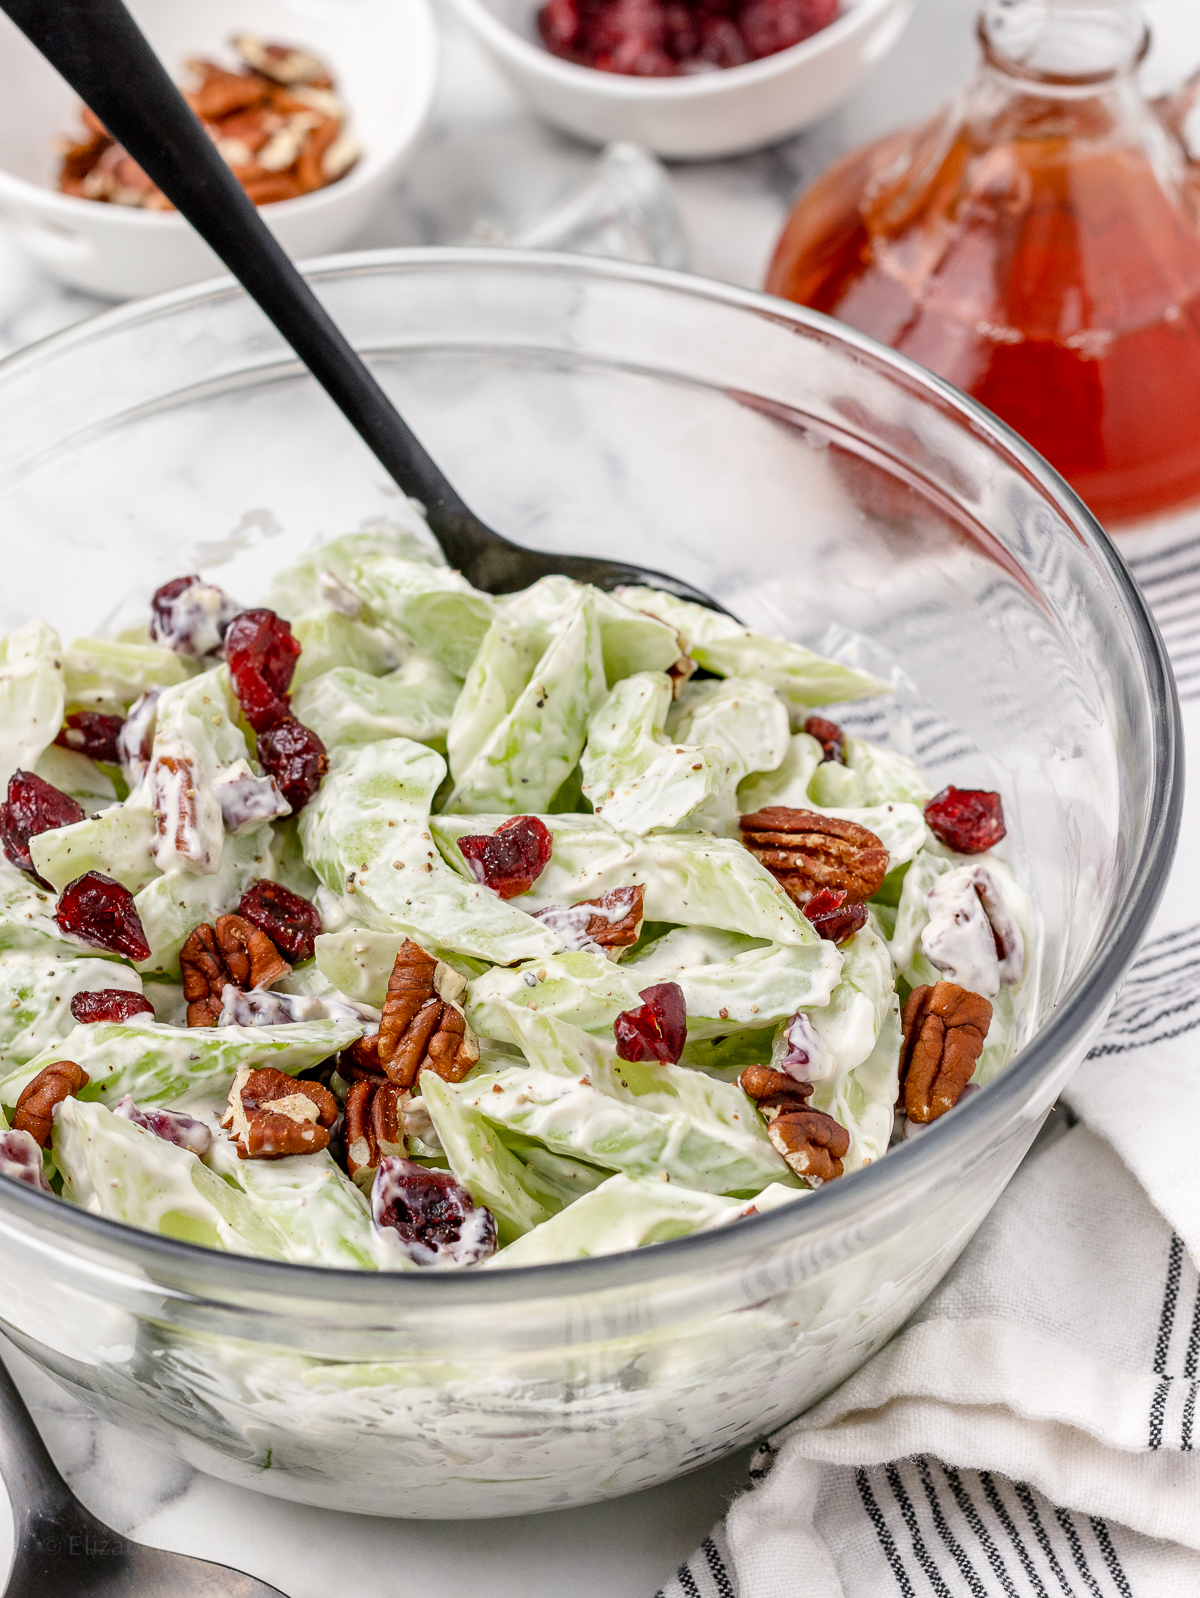 A big bowl of Celery Salad and a spoon ready for serving. More chopped pecans, dried cranberries, and a bottle of red wine vinegar in the background.